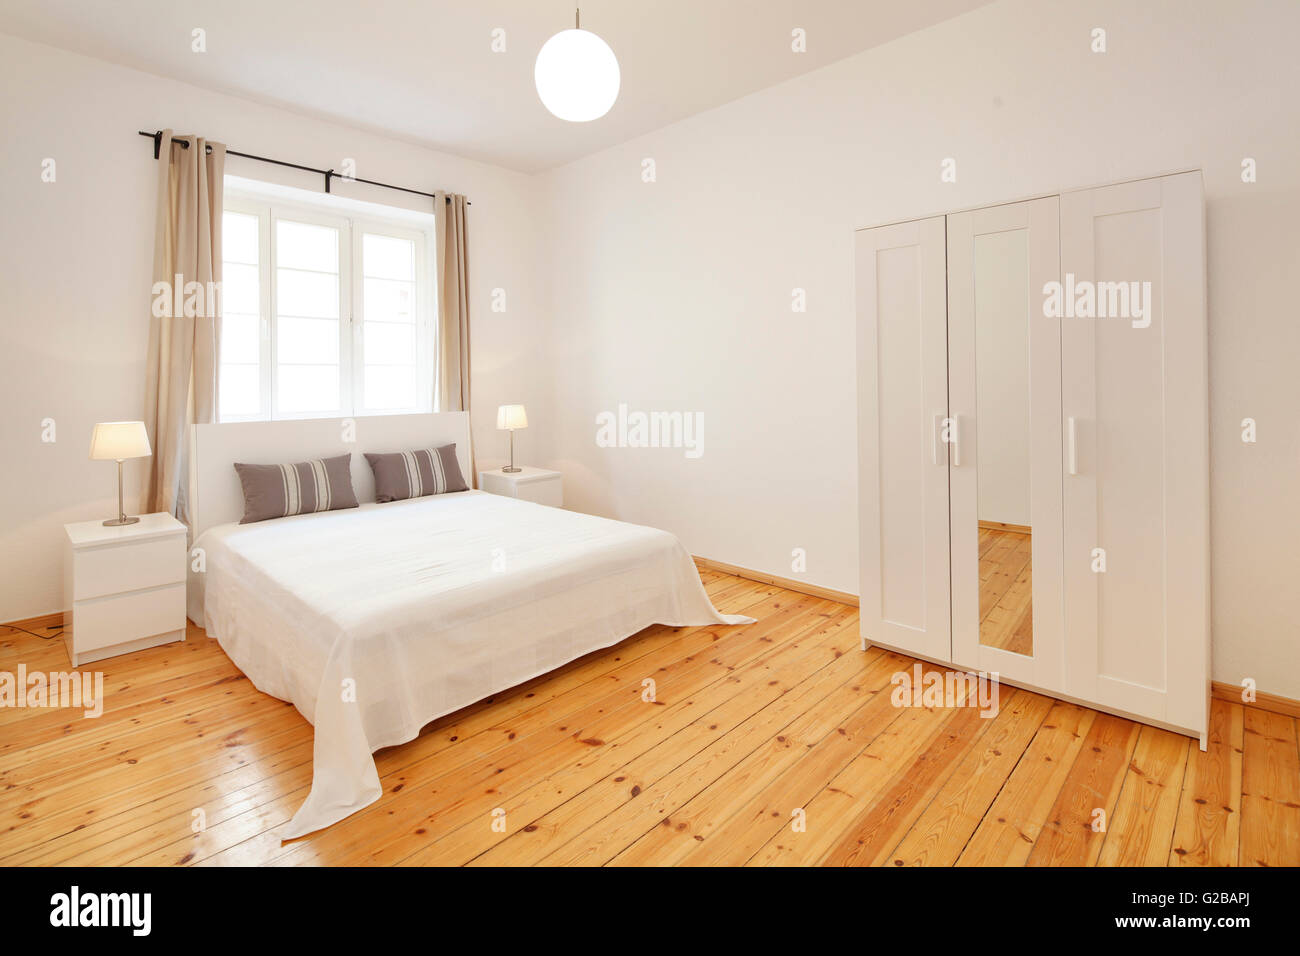 Wisbyer Strasse 59. Modern, minimal bedroom with neutral tones and large window. Stock Photo